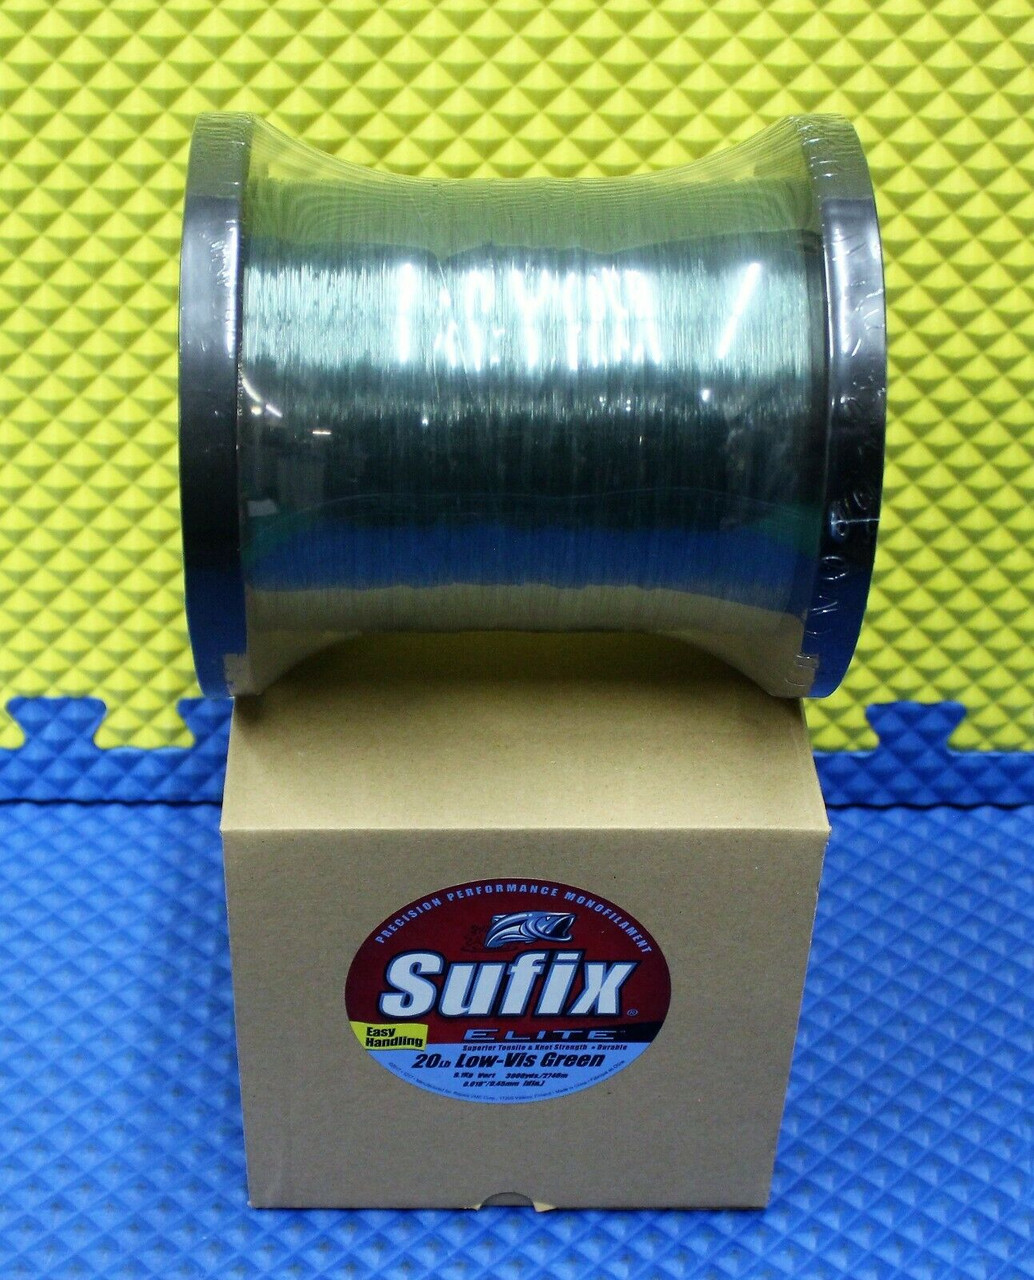  Sufix Siege 3000-Yards Spool Size Fishing Line (Clear, 8-Pound)  : Monofilament Fishing Line : Sports & Outdoors